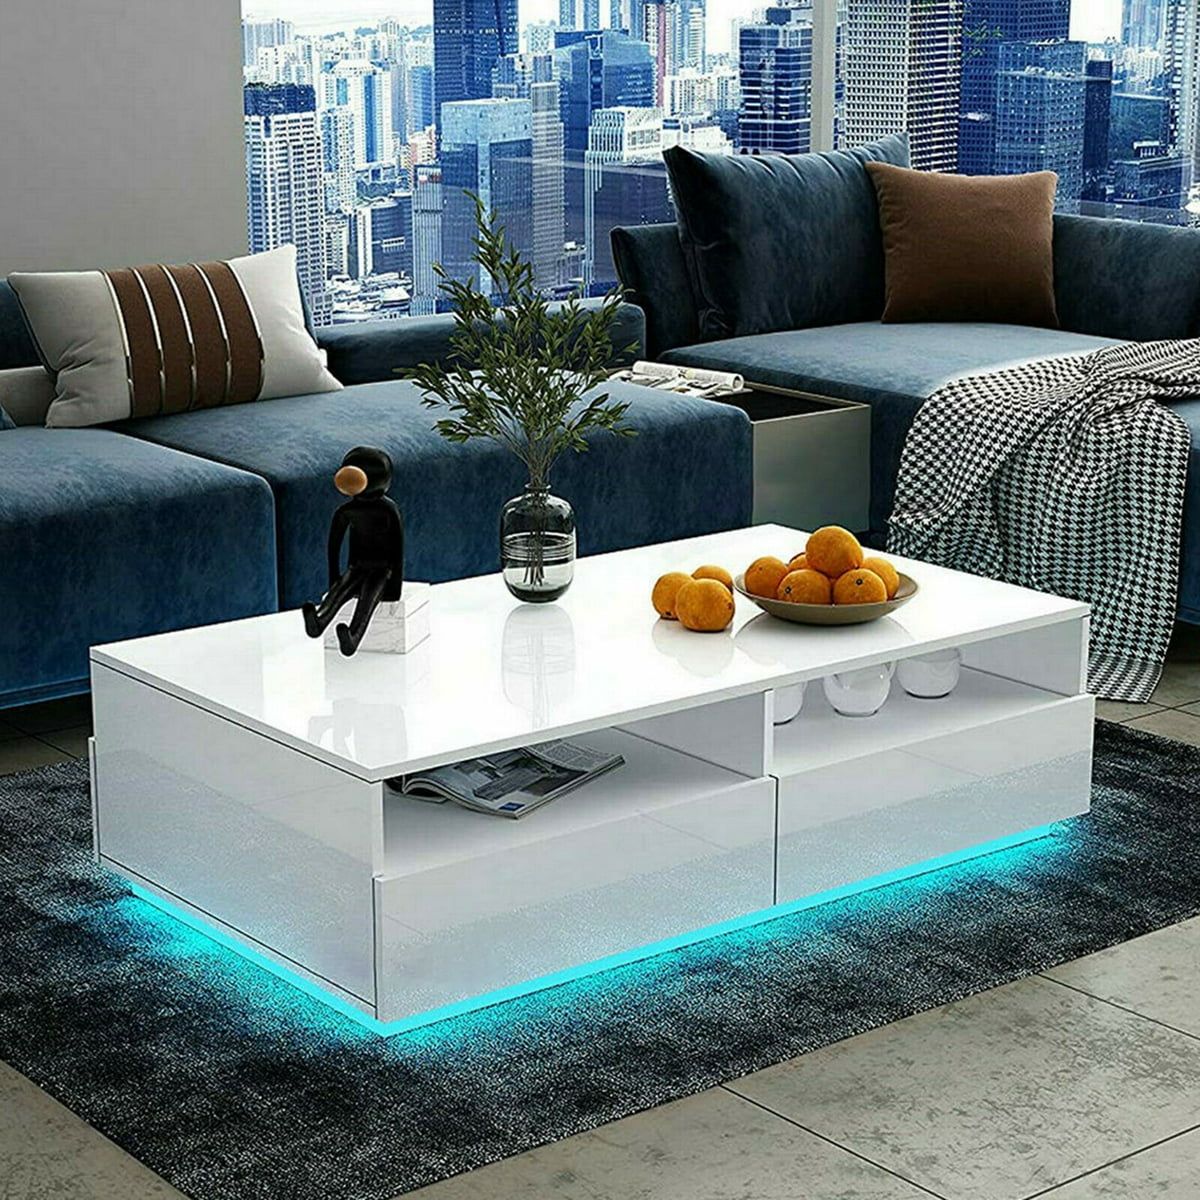 Hommpa Led Coffee Table Rectangular High Gloss Cote Divoire | Ubuy Inside Coffee Tables With Led Lights (View 14 of 15)